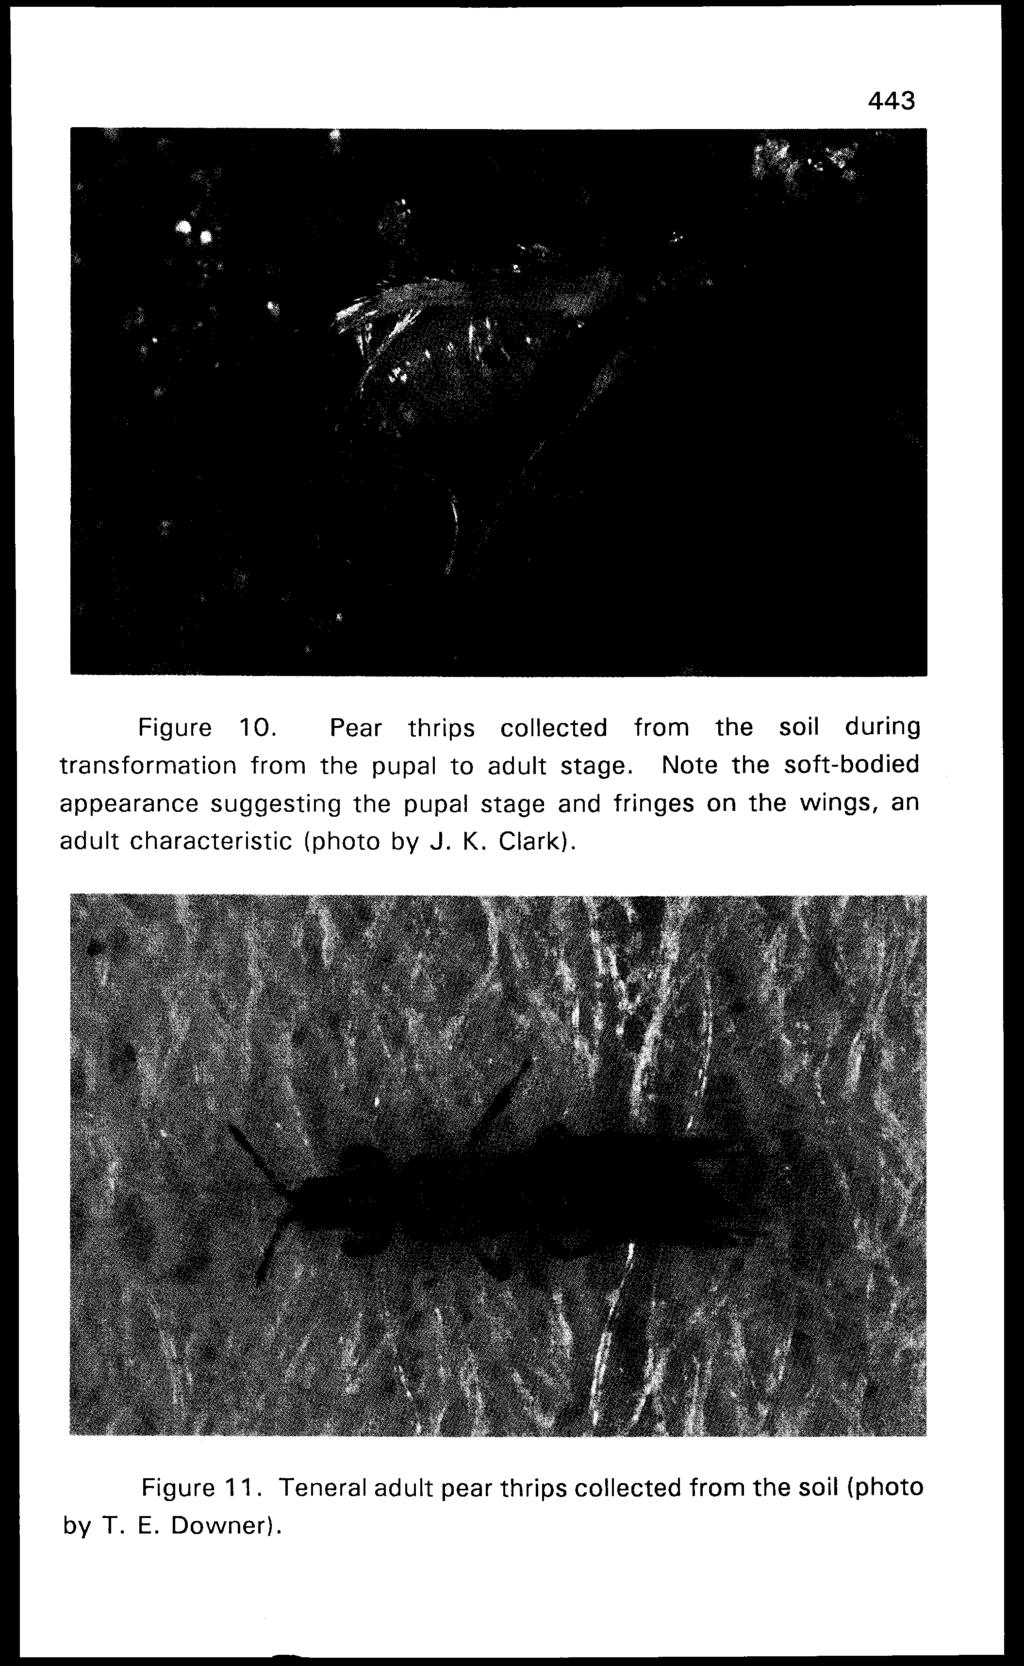 Figure 10. Pear thrips collected from the soil during transformation from the pupal to adult stage.